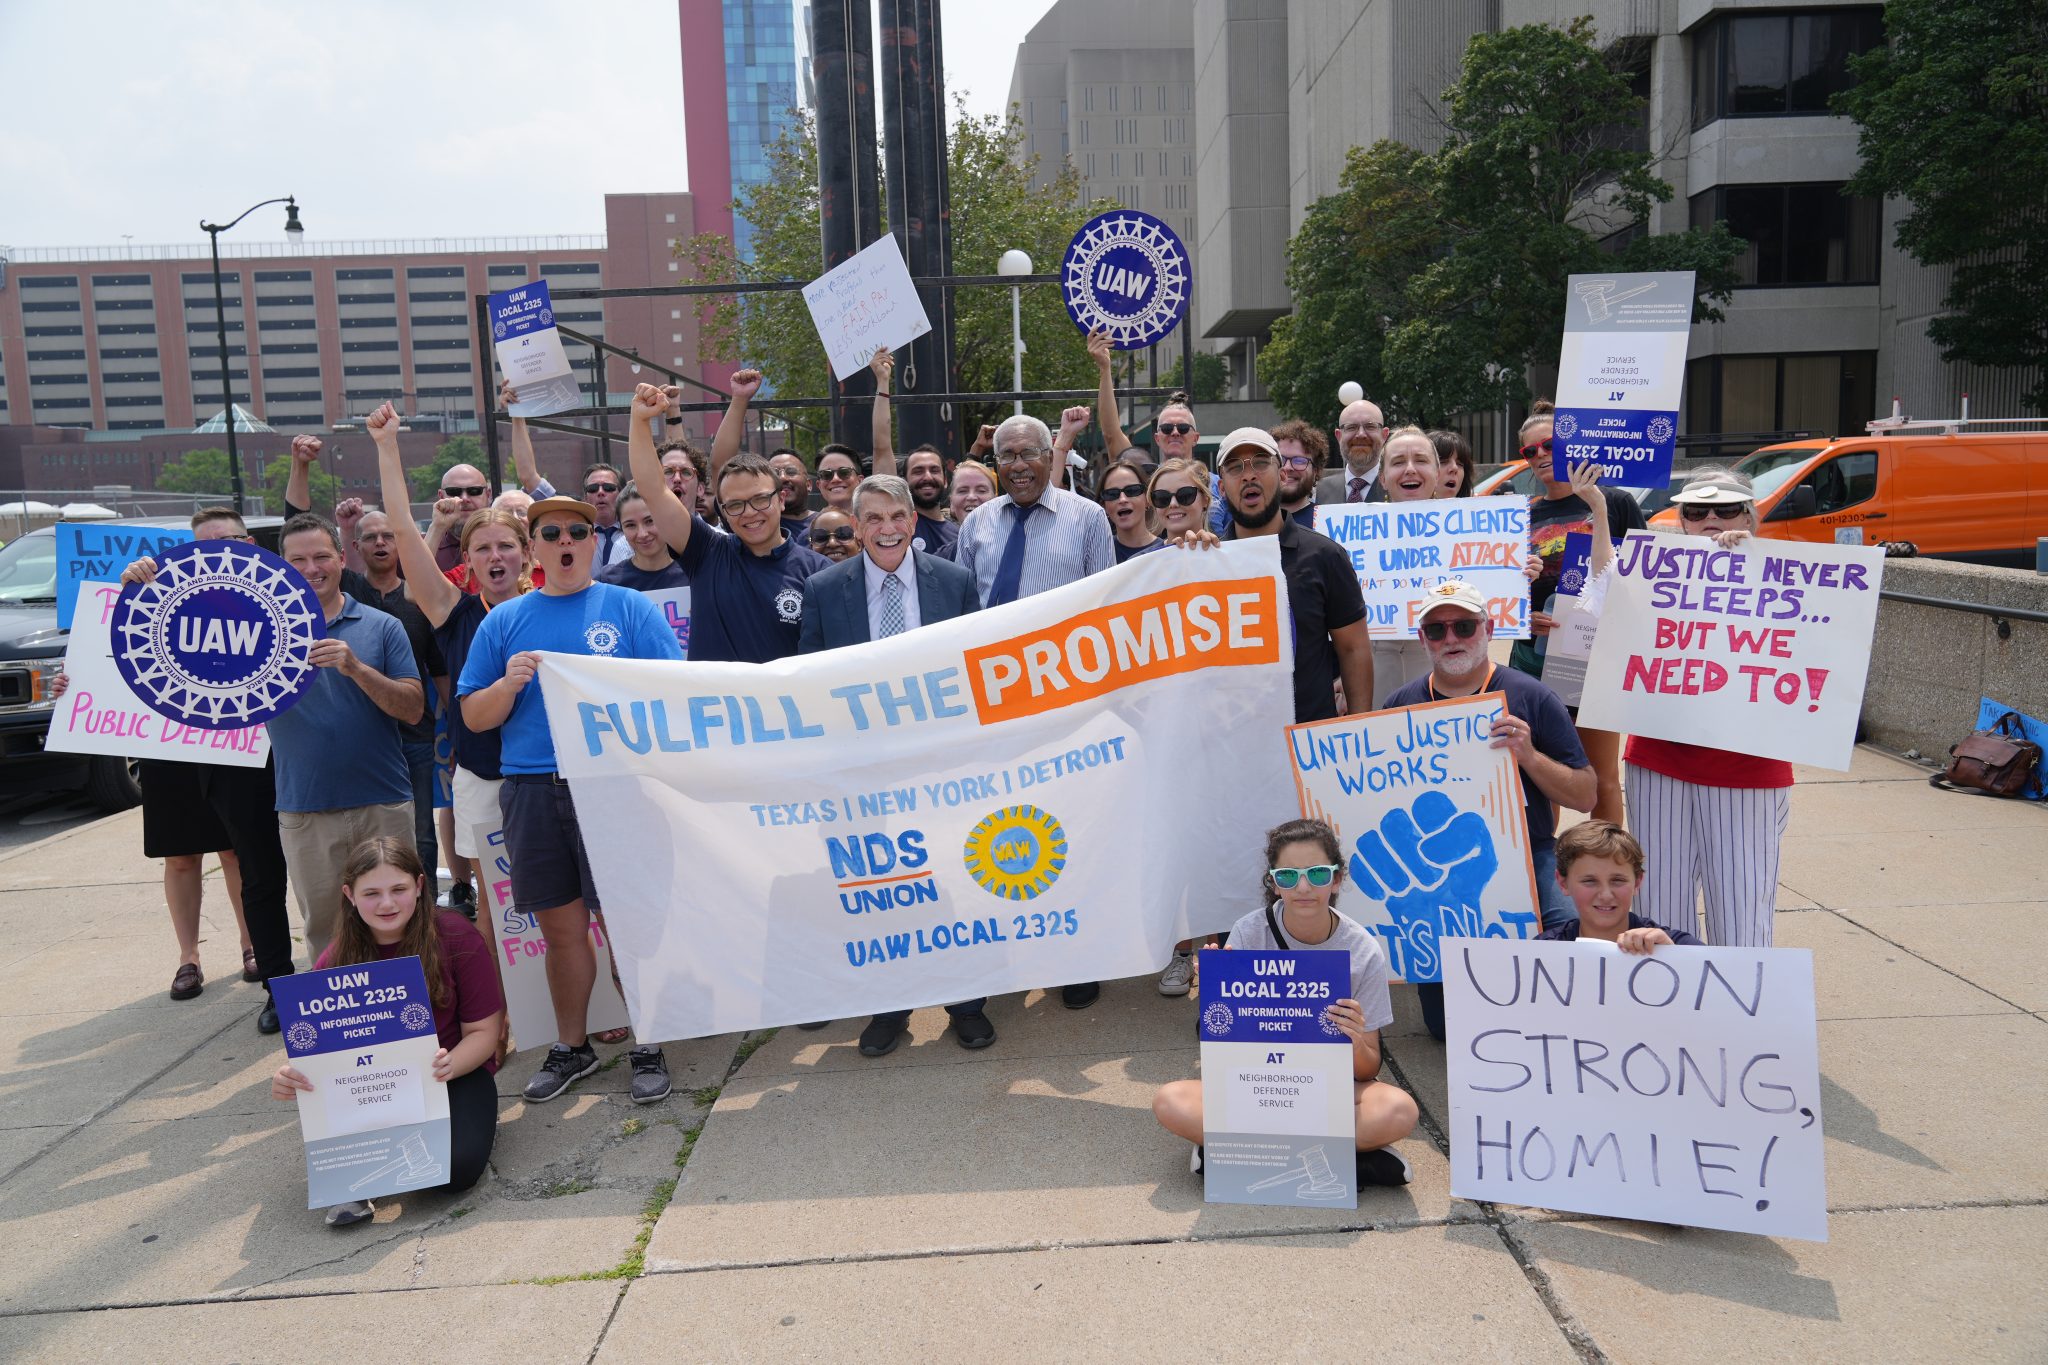 Hundreds Mobilize Across the United States for a Fair Contract as NDS Continues Focus on Expansion